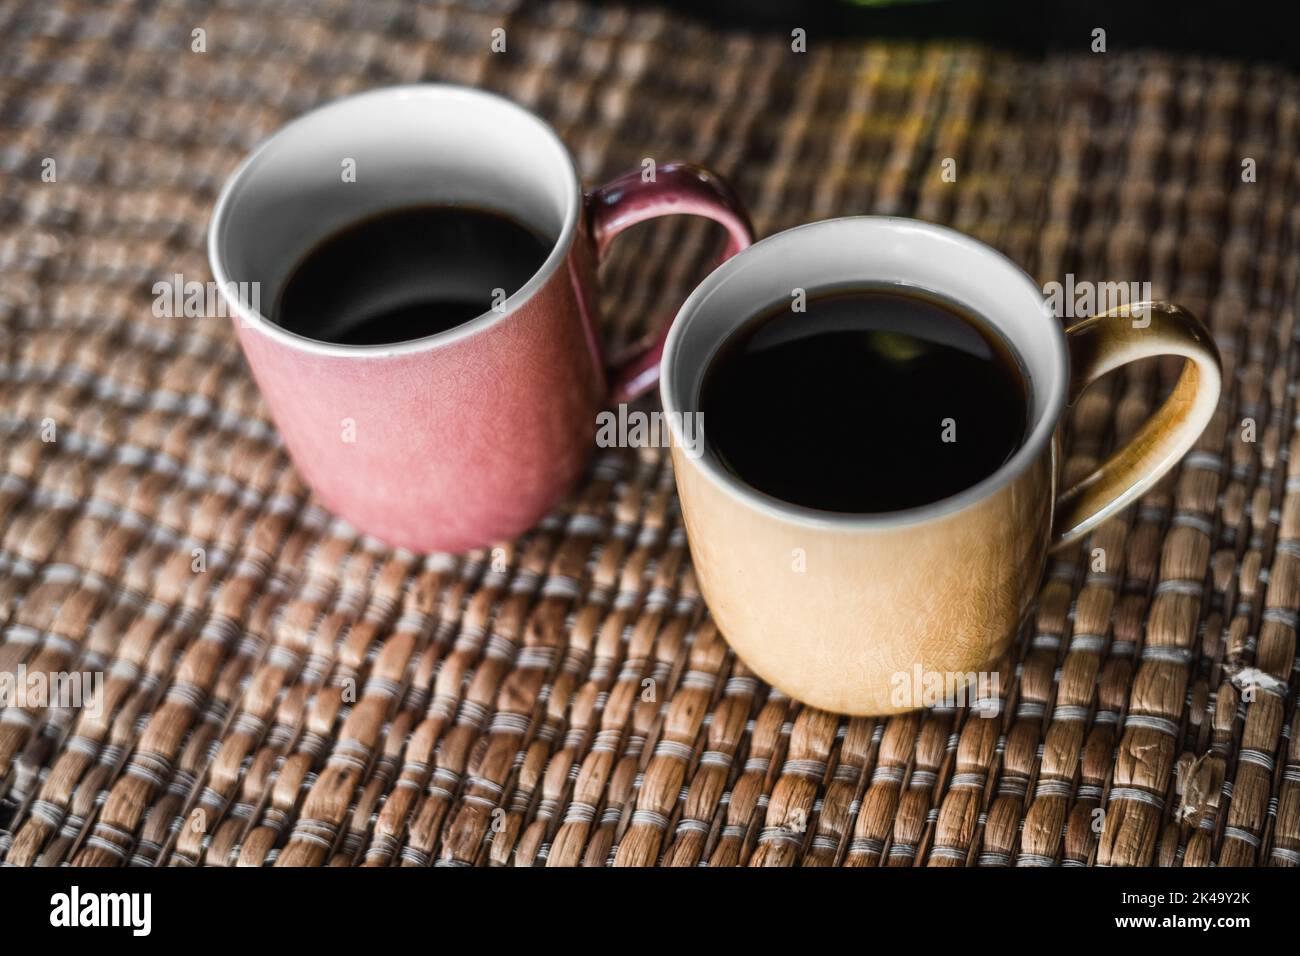 two porcelain cups on a wicker tablecloth one full and one half full coffee cup ready for breakfast Stock Photo